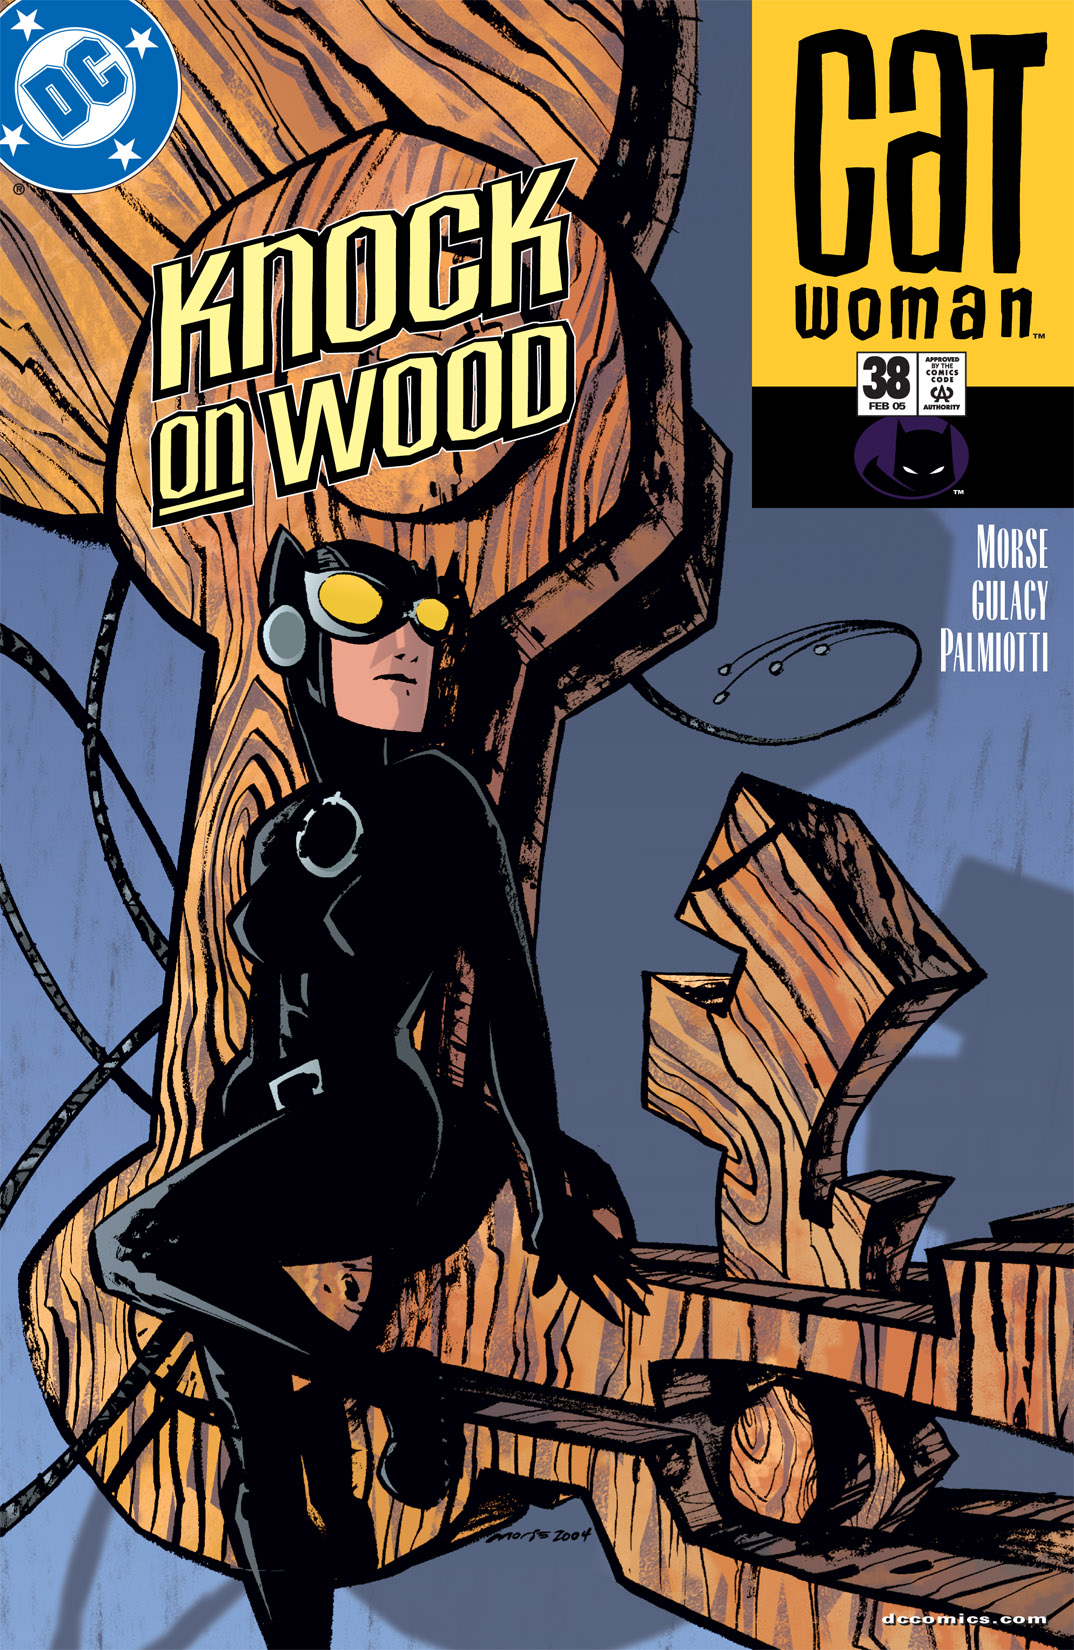 Read online Catwoman (2002) comic -  Issue #38 - 1